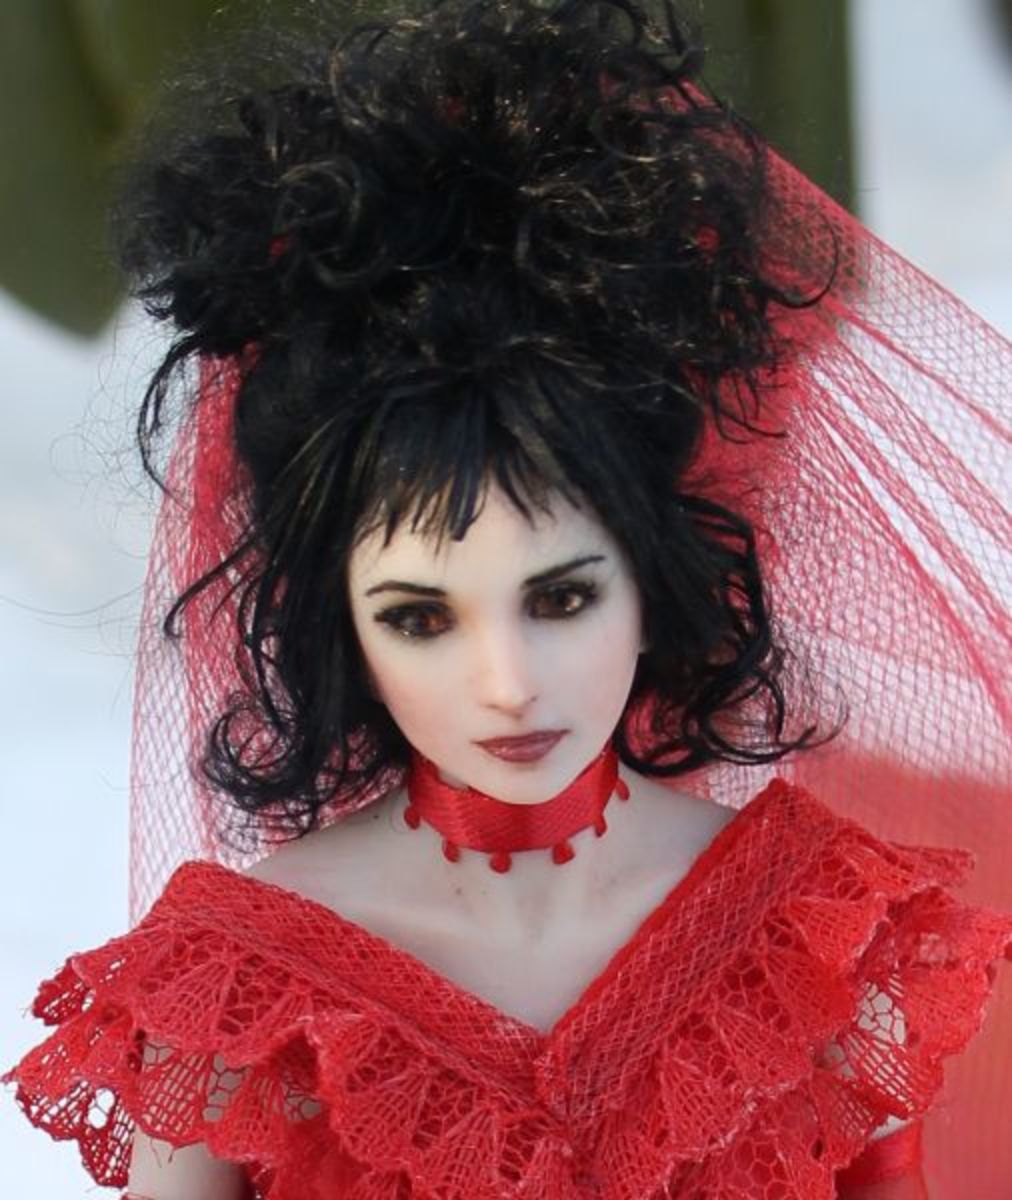 Hollywood Doll Wynona Ryder as Lydia from Beetlejuice by Patricia Gibbons